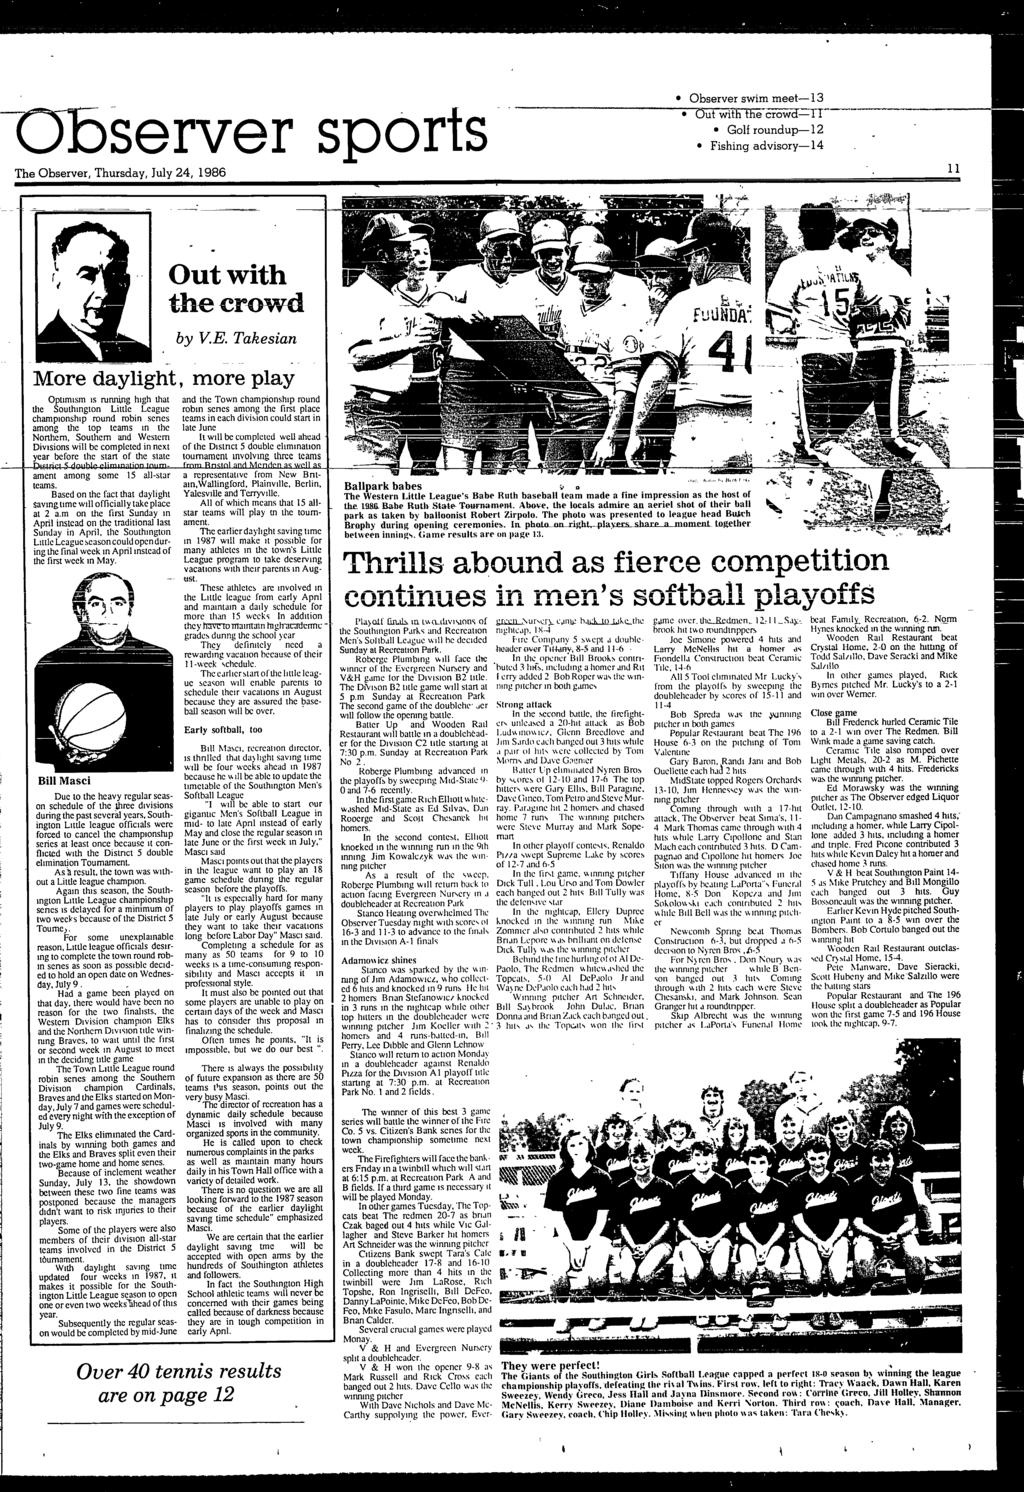 Observer sports The Observer, Thursday, July 24, 1986 Observer swim meet-- 13 Golf roundup 12 Fishing advisory--14 11 Out with the crowd by V.E.